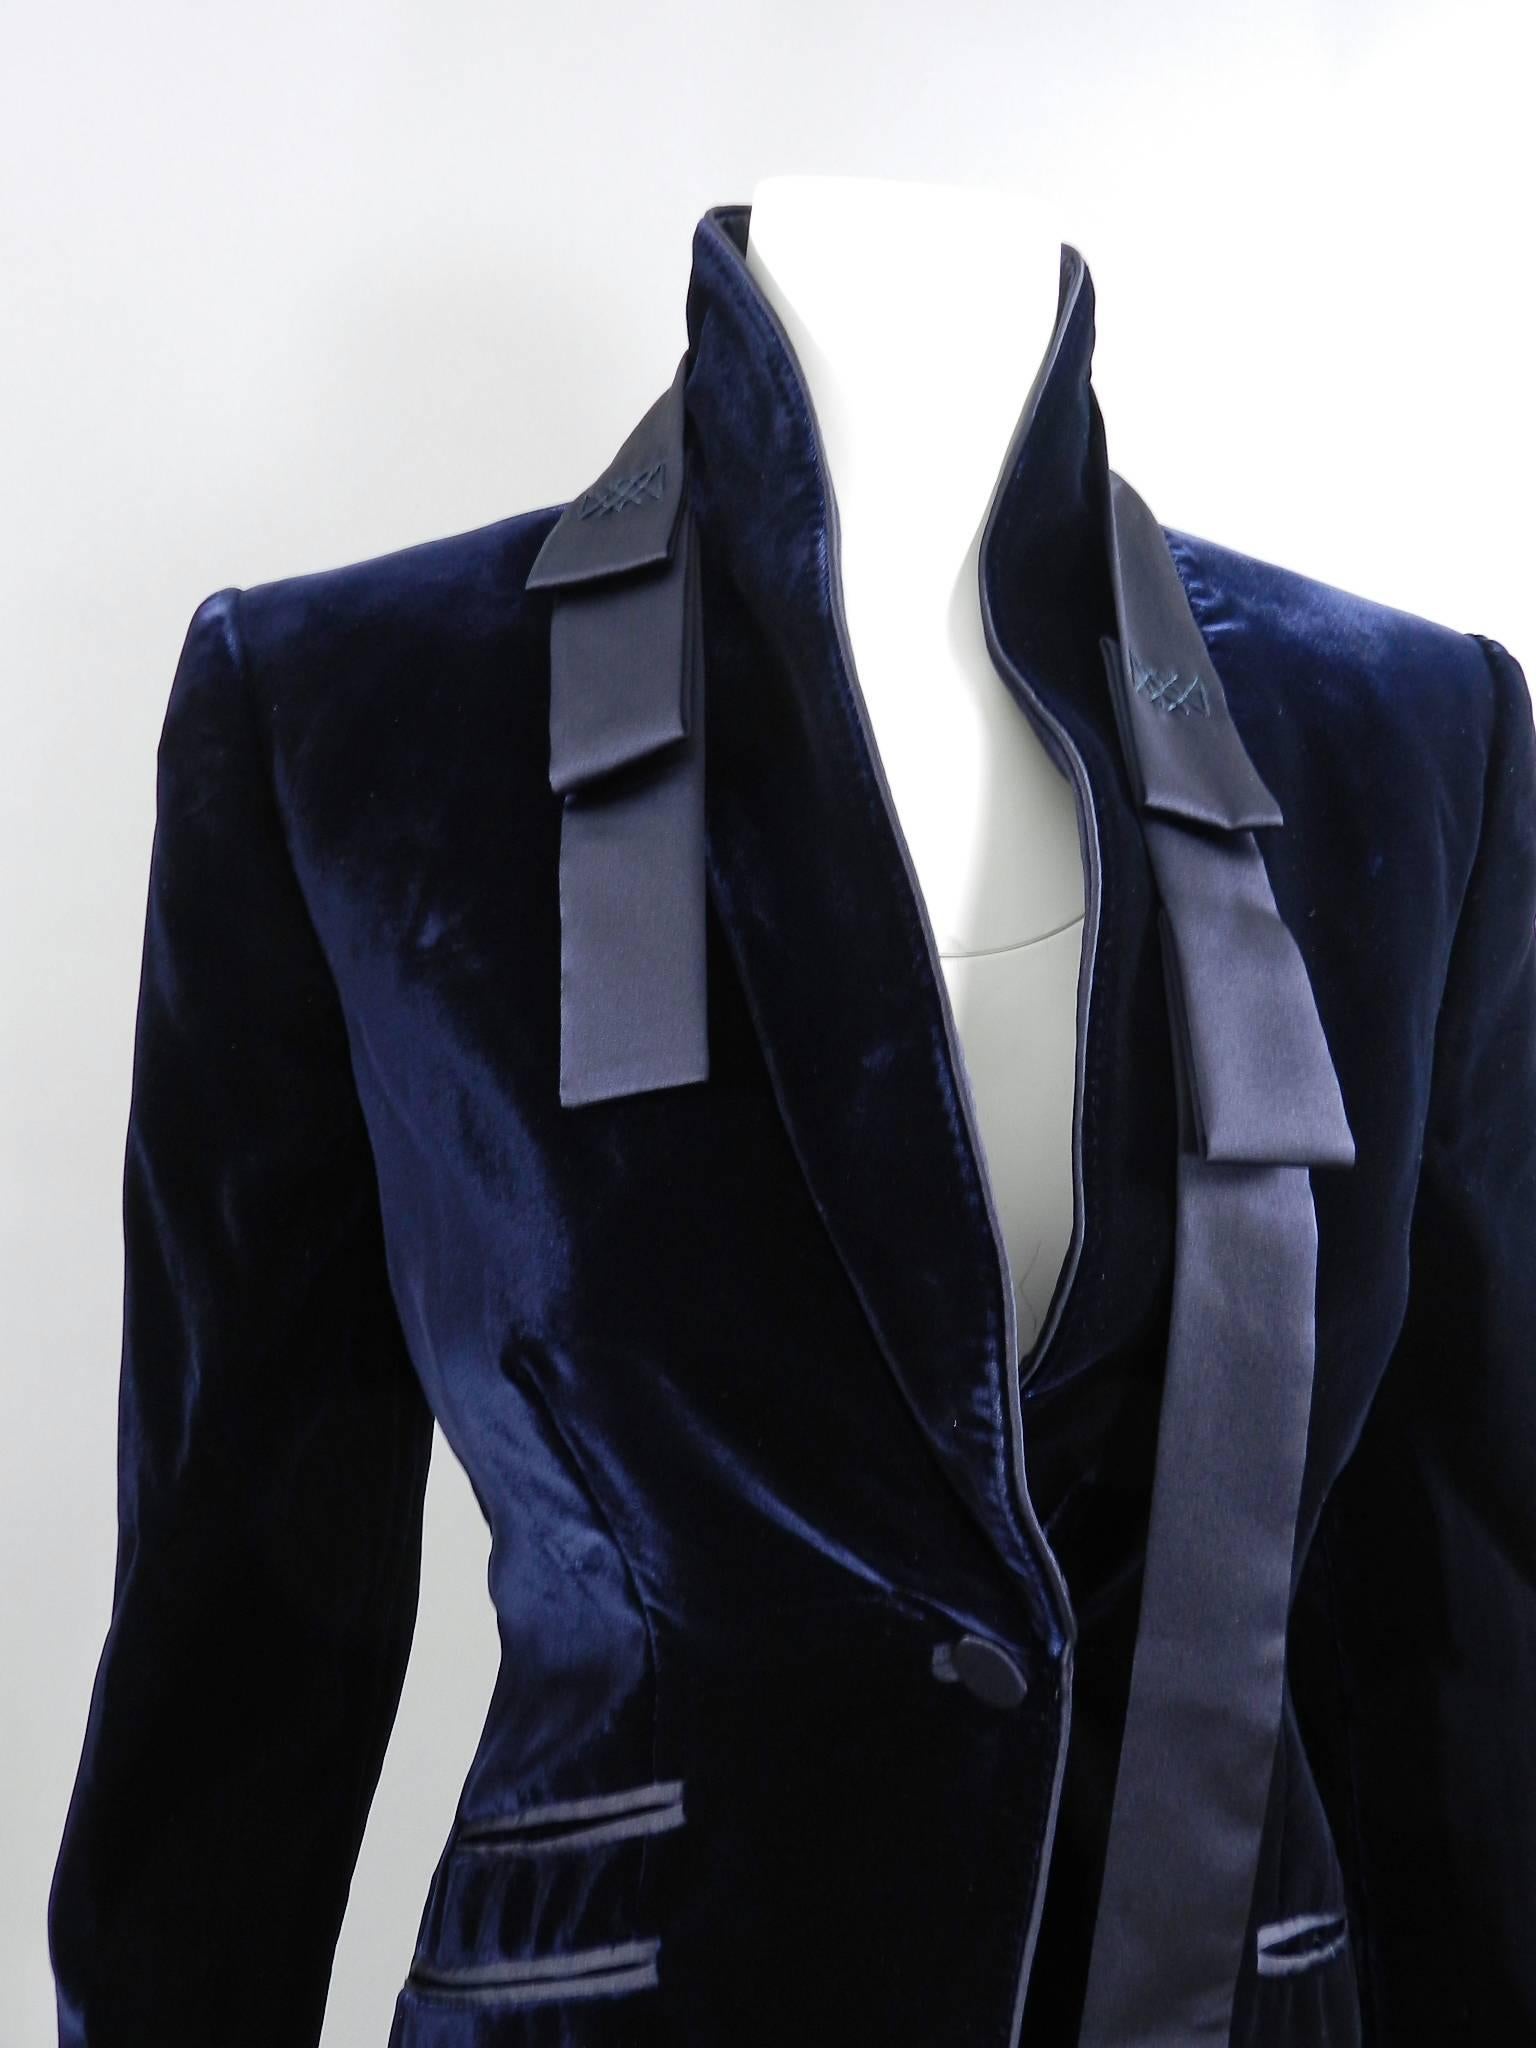 Gucci Midnight Navy Blue Velvet Blazer Jacket with Sash.  Photo from the same all blue runway collection is included for inspiration even though it does not picture the exact jacket for sale. 100% rayon velvet, fastens at front with 1 covered